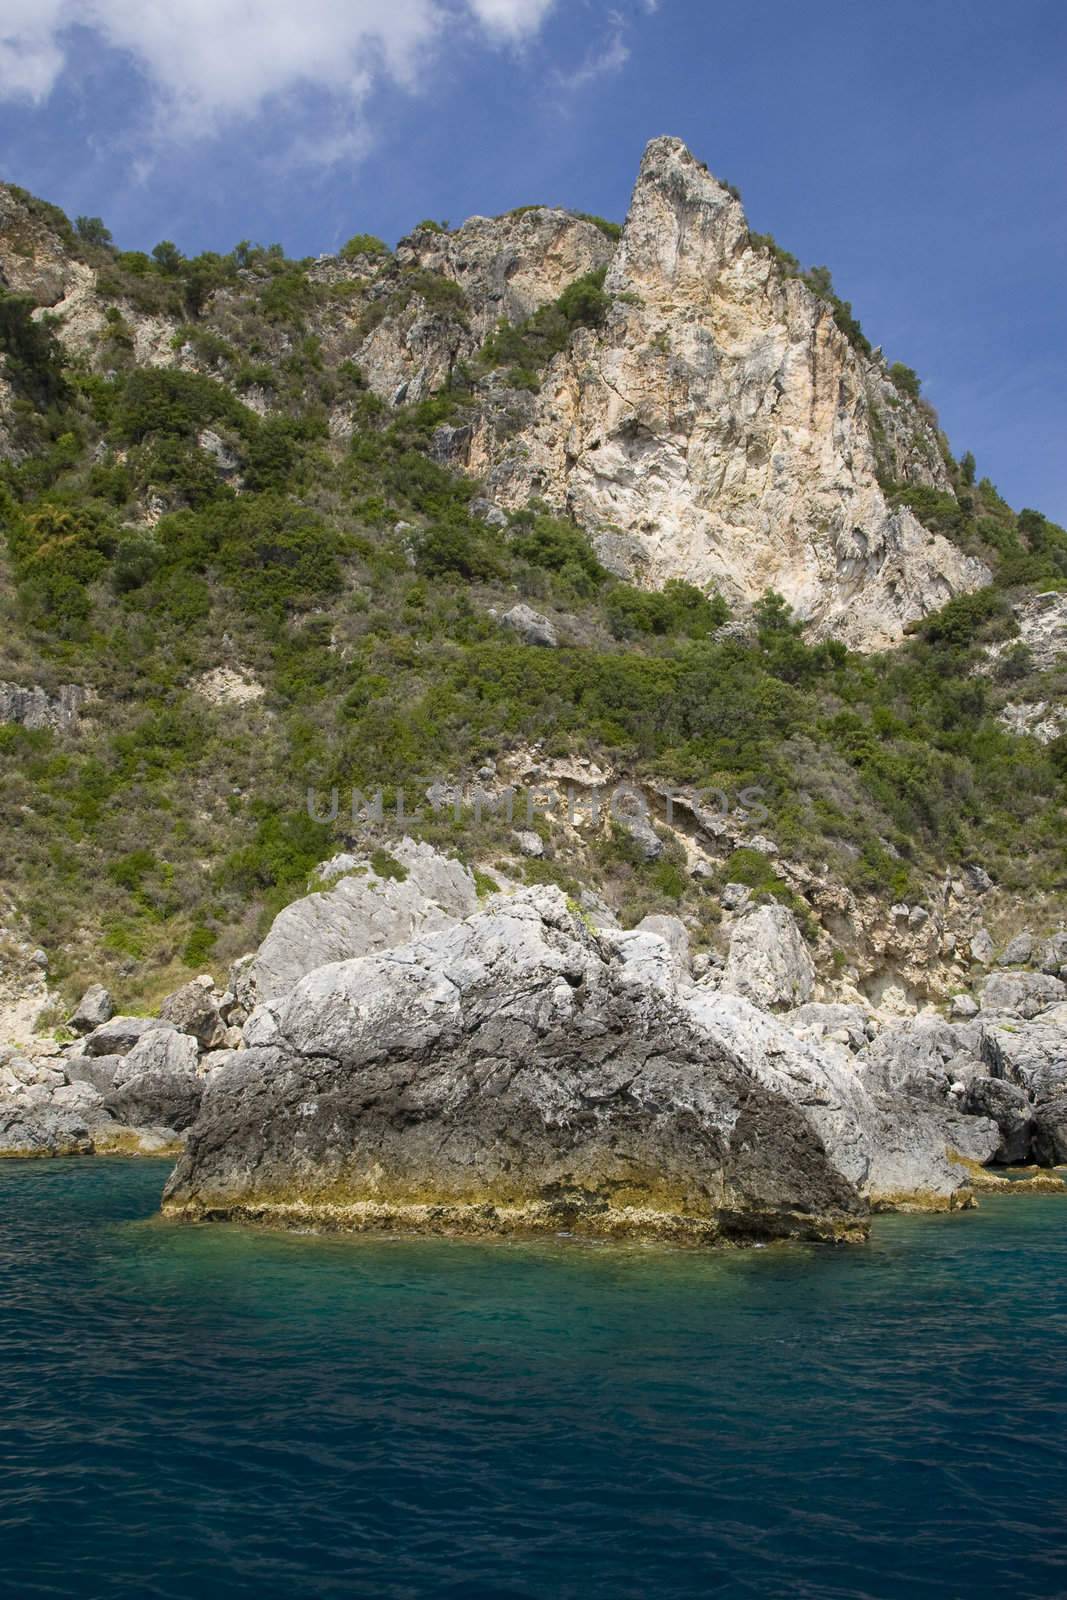 Corfu Island - View from the boat